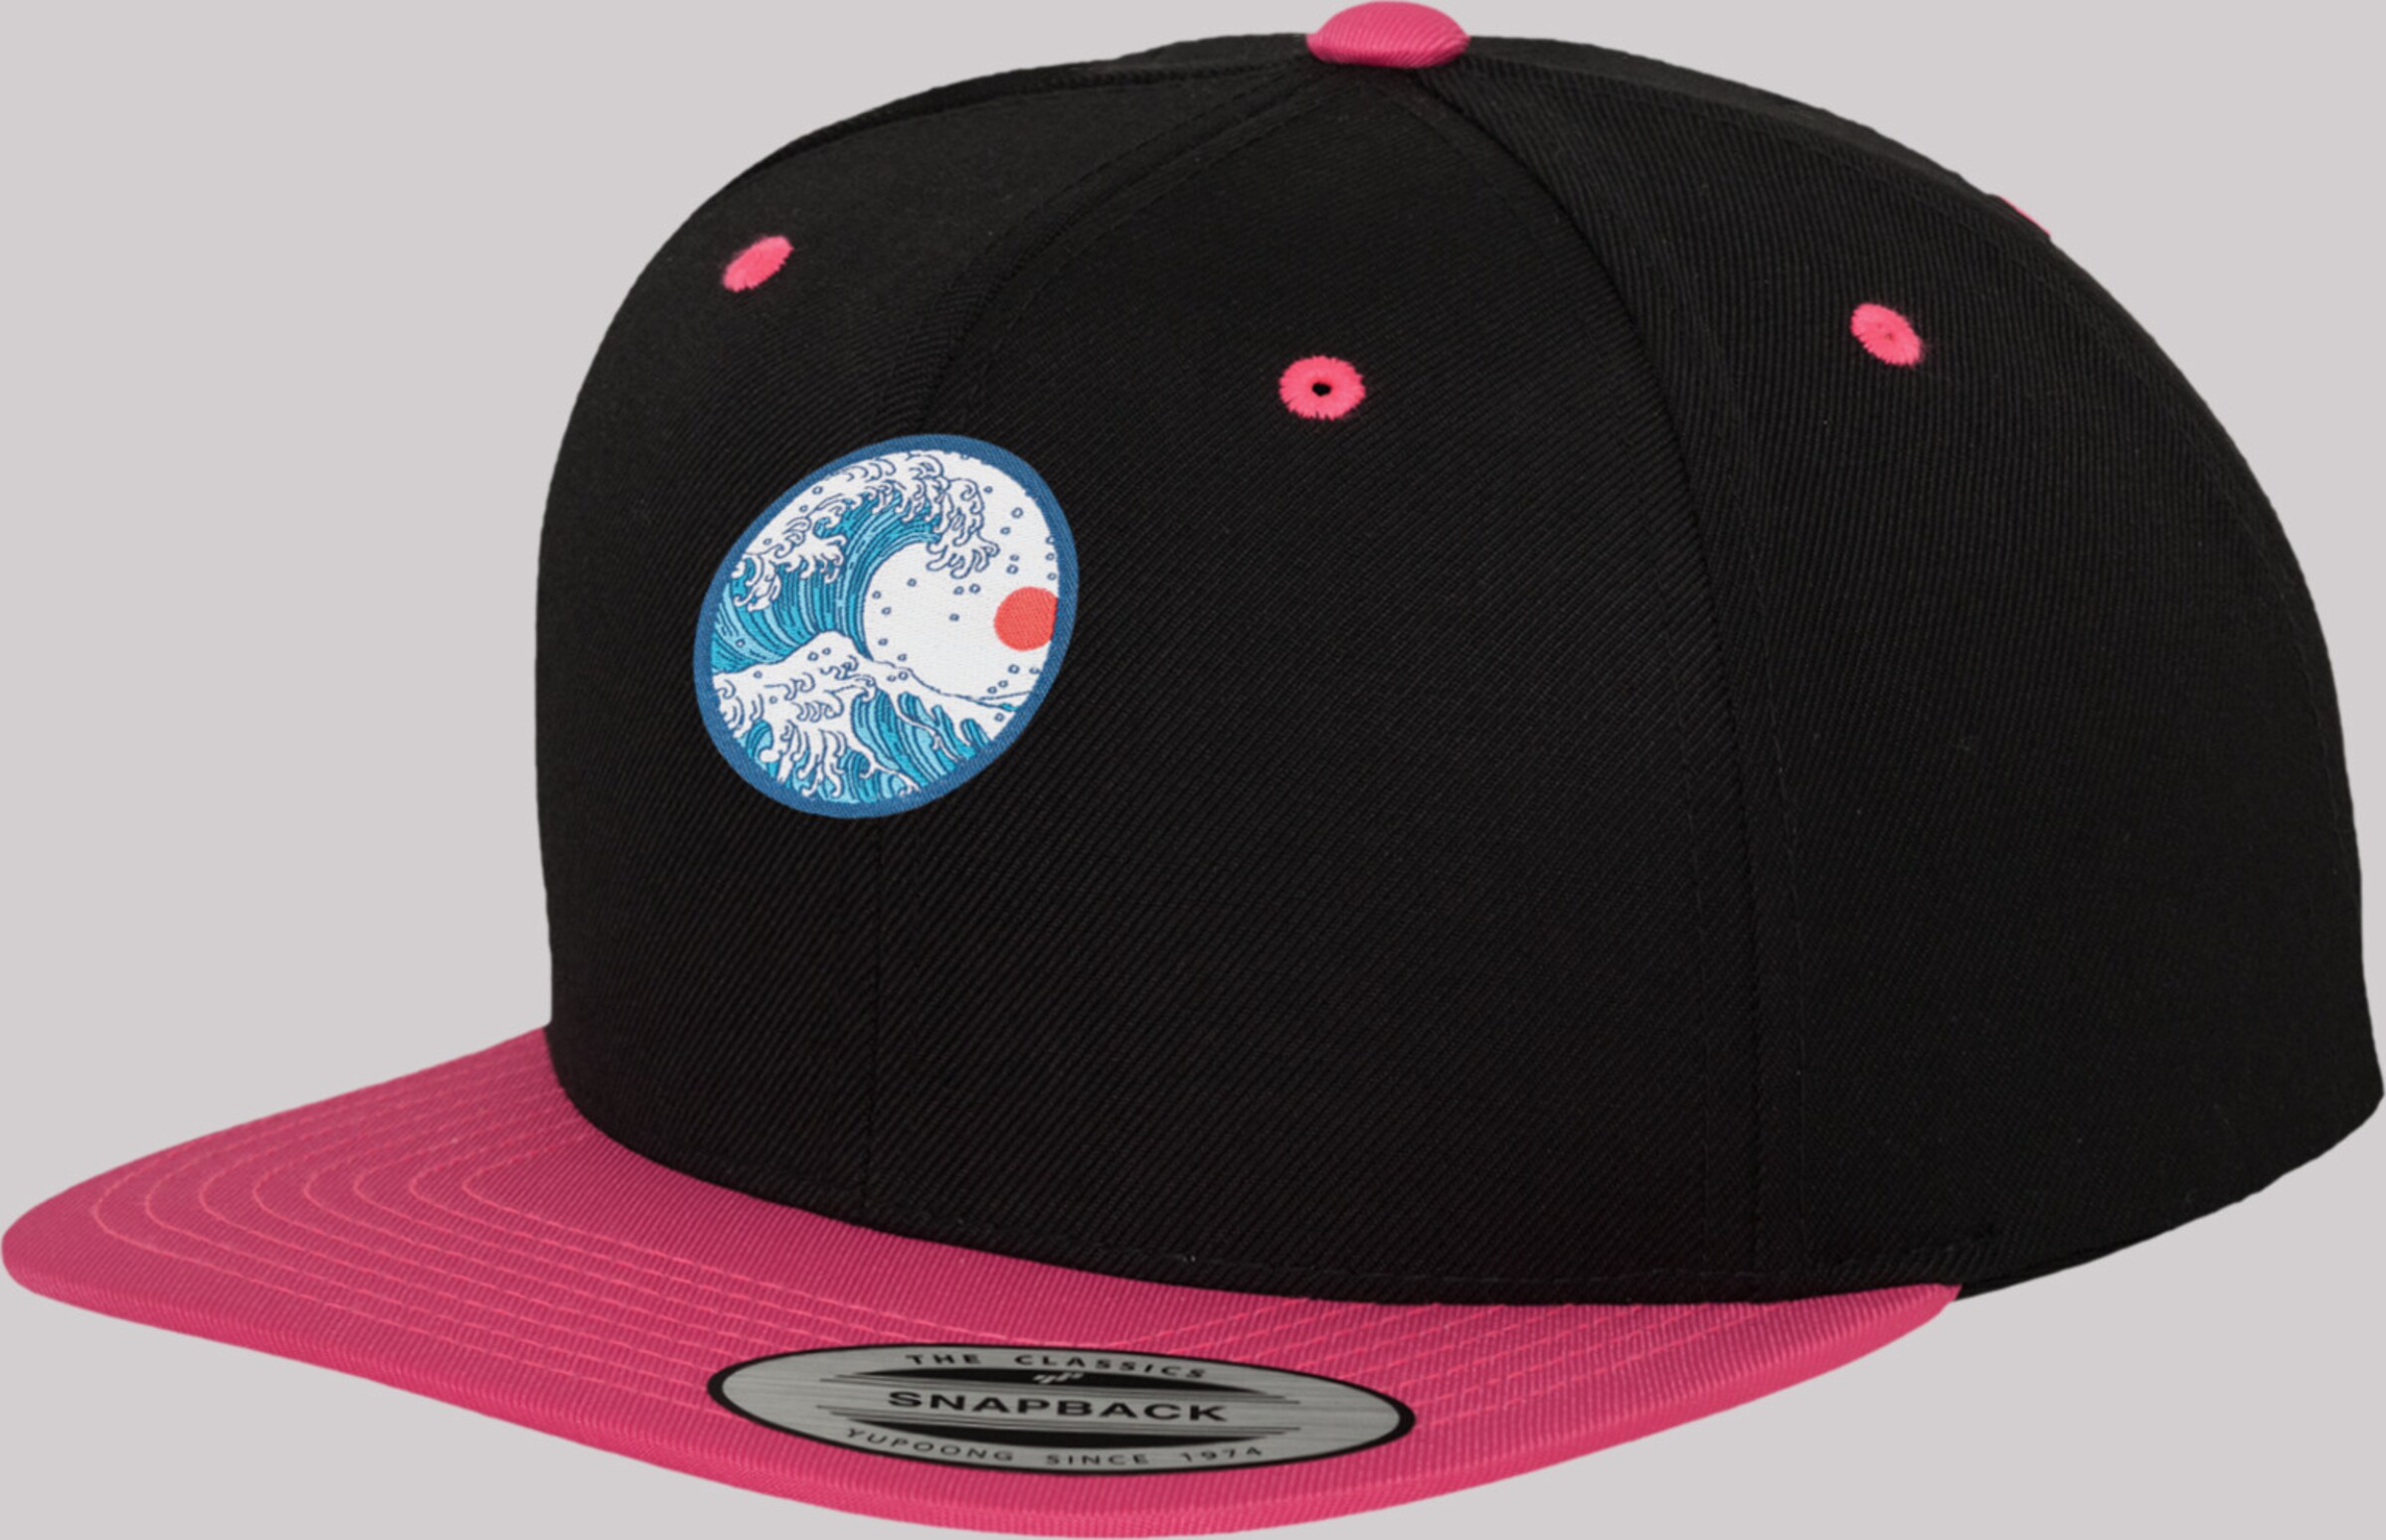 Black YOU | in Cap Pink, ABOUT F4NT4STIC Neon \'Kanagawa\'